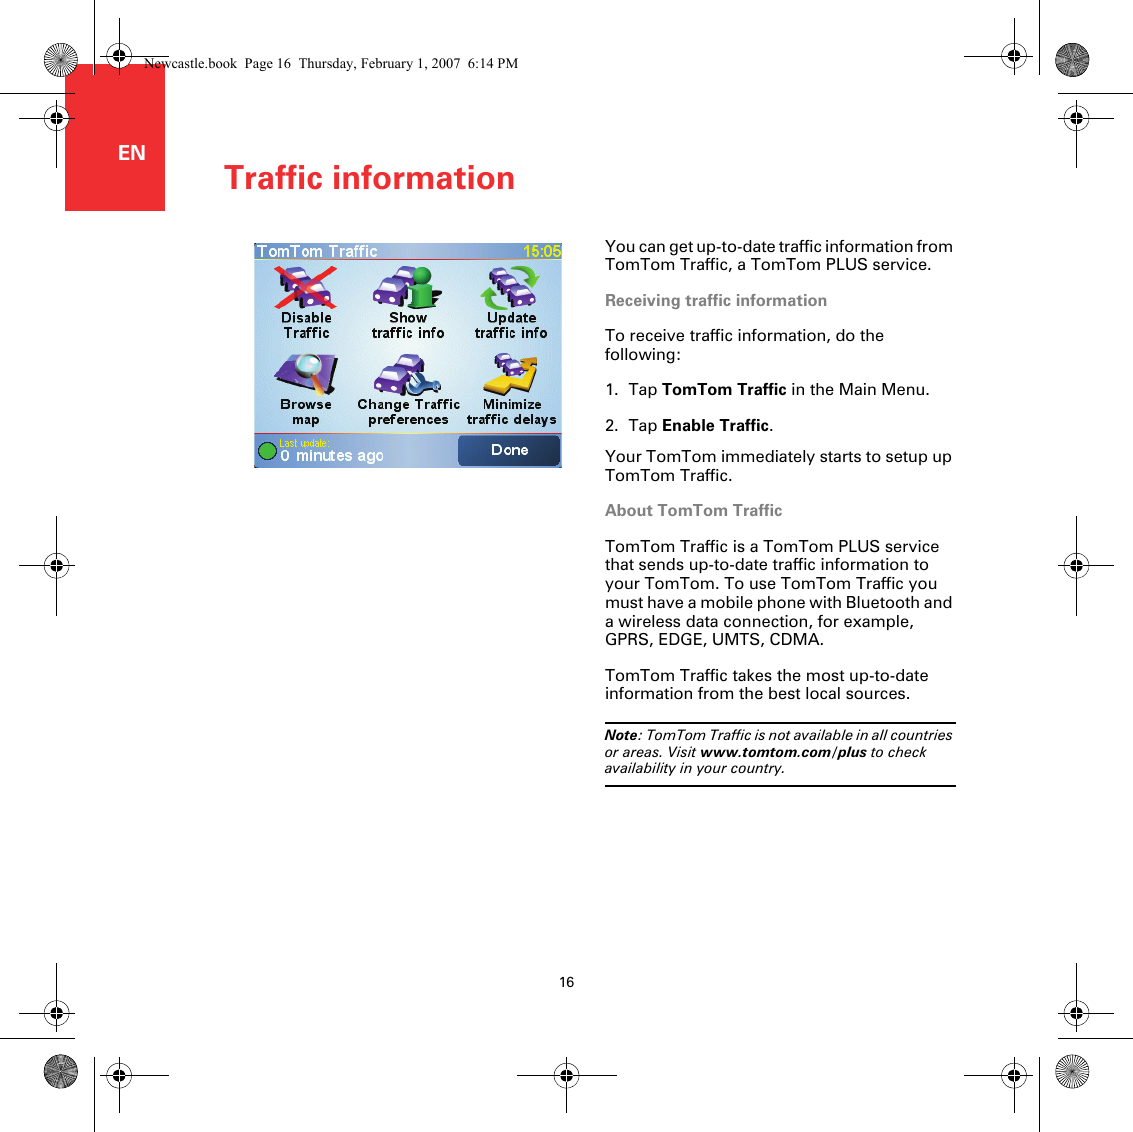 Traffic information16ENTraffic information You can get up-to-date traffic information from TomTom Traffic, a TomTom PLUS service.Receiving traffic informationTo receive traffic information, do the following:1. Tap TomTom Traffic in the Main Menu.2. Tap Enable Traffic.Your TomTom immediately starts to setup up TomTom Traffic.About TomTom TrafficTomTom Traffic is a TomTom PLUS service that sends up-to-date traffic information to your TomTom. To use TomTom Traffic you must have a mobile phone with Bluetooth and a wireless data connection, for example, GPRS, EDGE, UMTS, CDMA.TomTom Traffic takes the most up-to-date information from the best local sources. Note: TomTom Traffic is not available in all countries or areas. Visit www.tomtom.com/plus to check availability in your country.Newcastle.book  Page 16  Thursday, February 1, 2007  6:14 PM